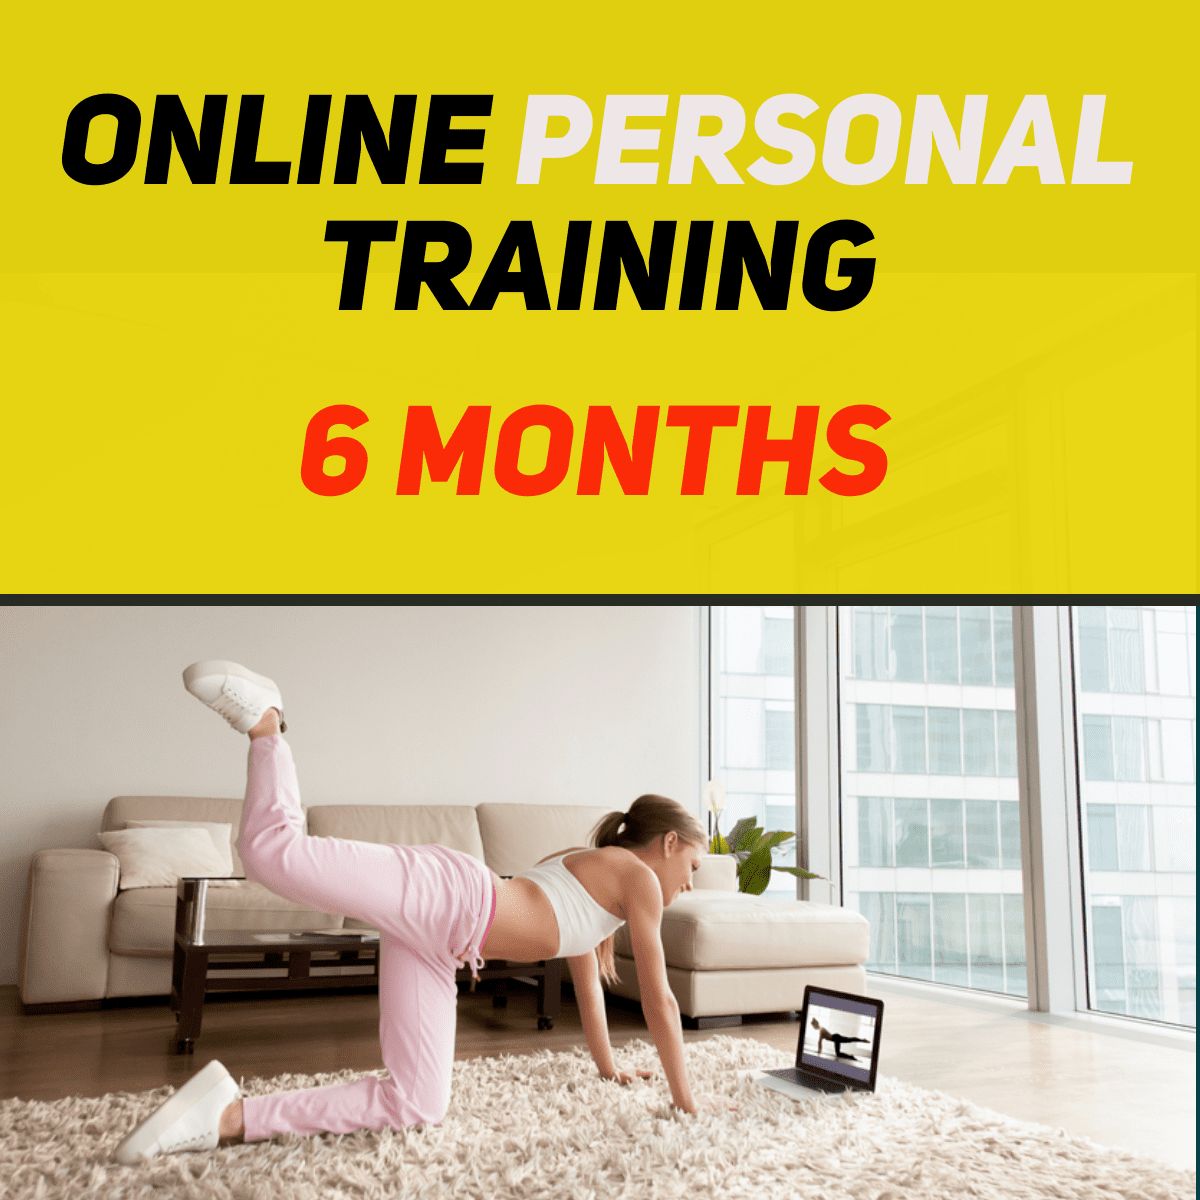 Online Personal Training 6 Months